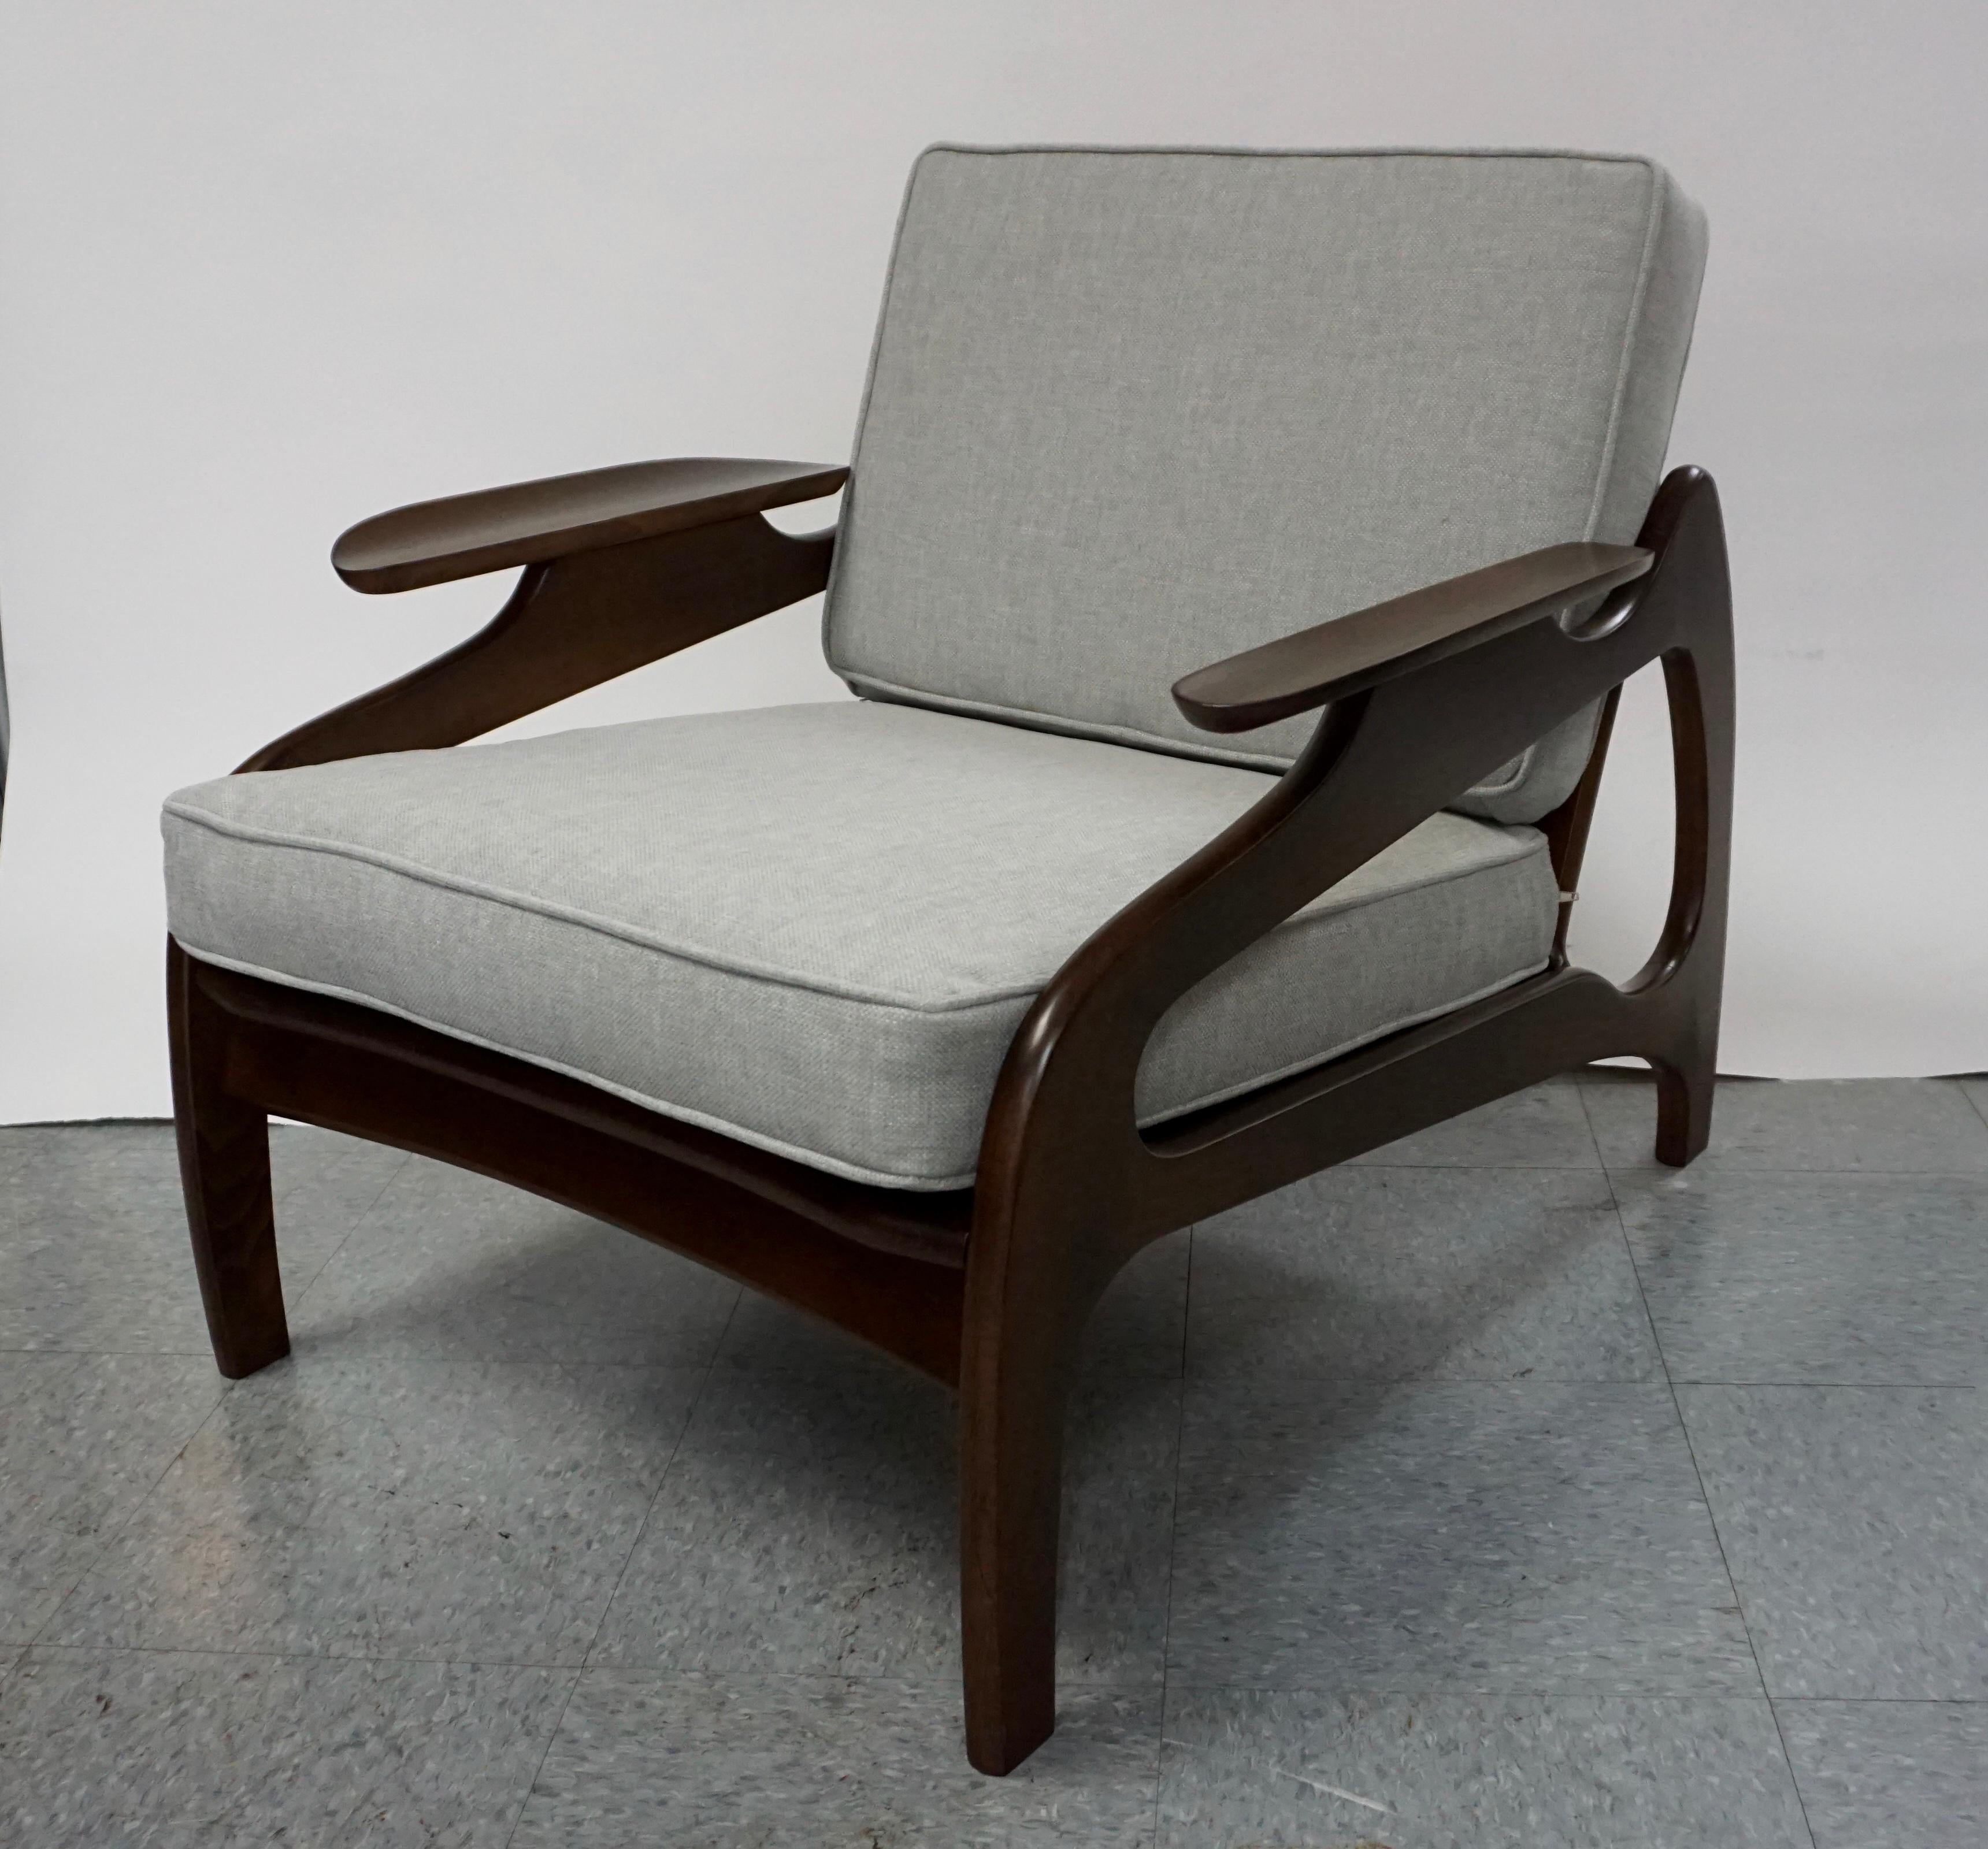 Pair of Adrian Pearsall lounge chairs in dark walnut finish. They have been restored with new upholstery and foam, as well as new Pirelli rubber strapping. Fabric is a light grey with white highlights. Woven backs are in great condition.